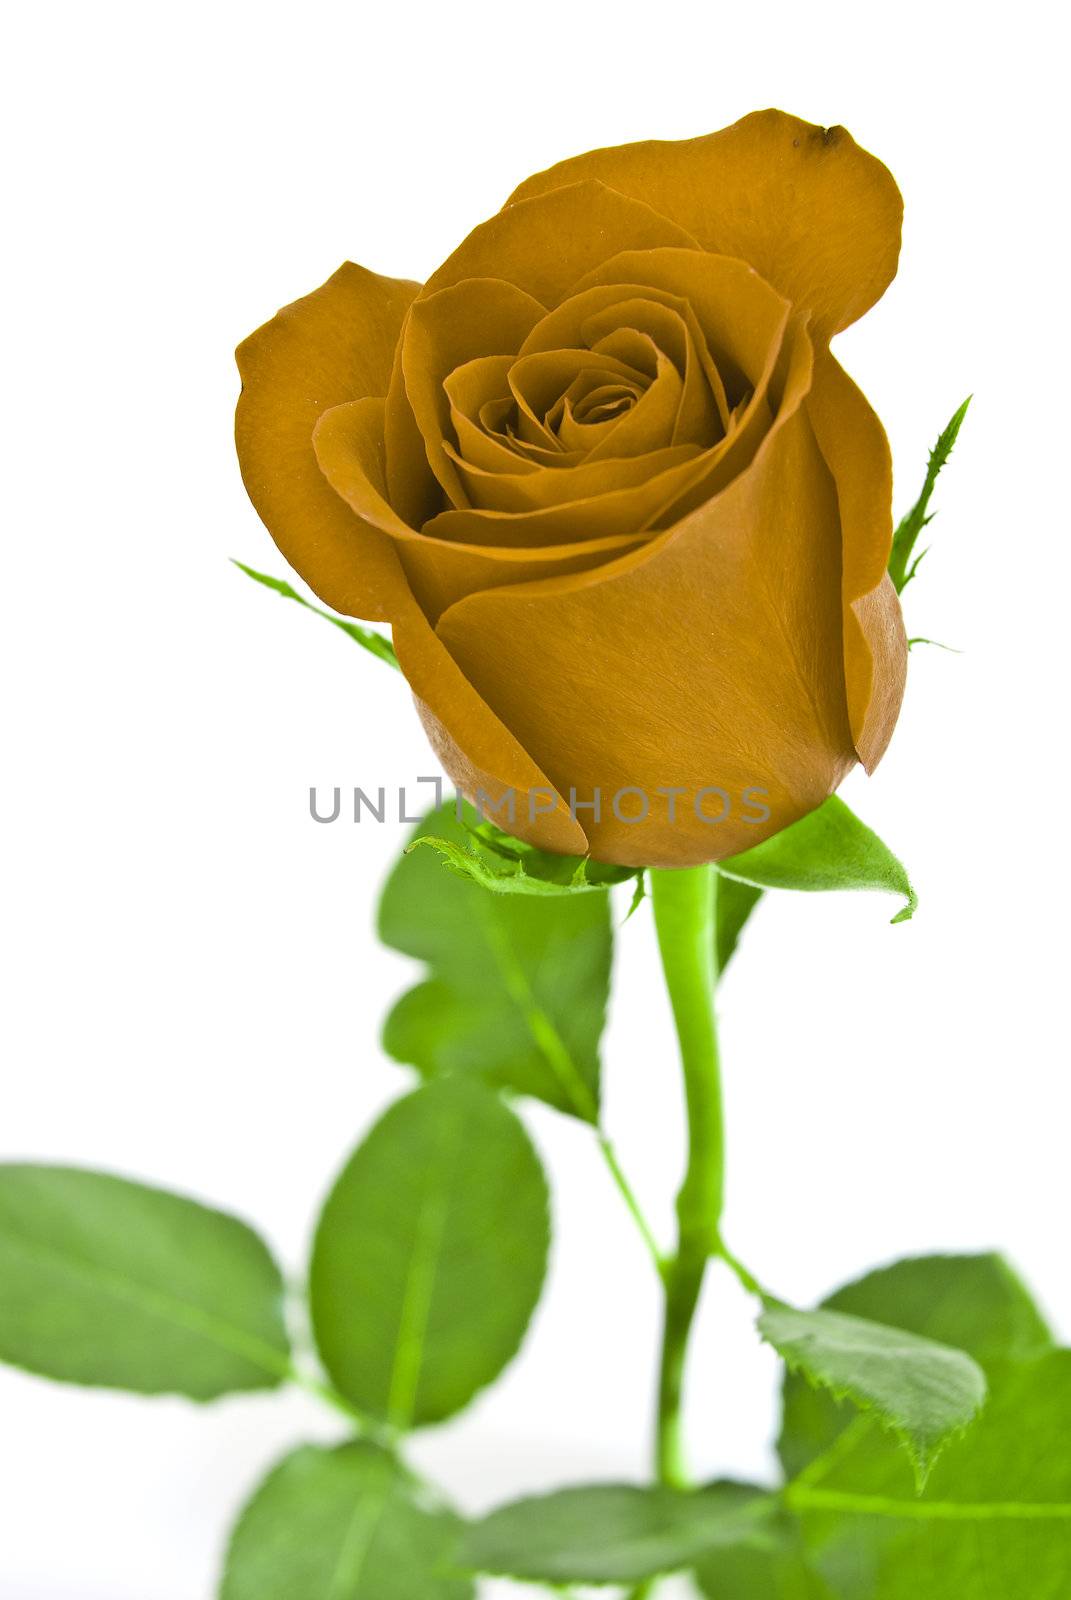 Yellow rose with green leaves. Isolated on white background.